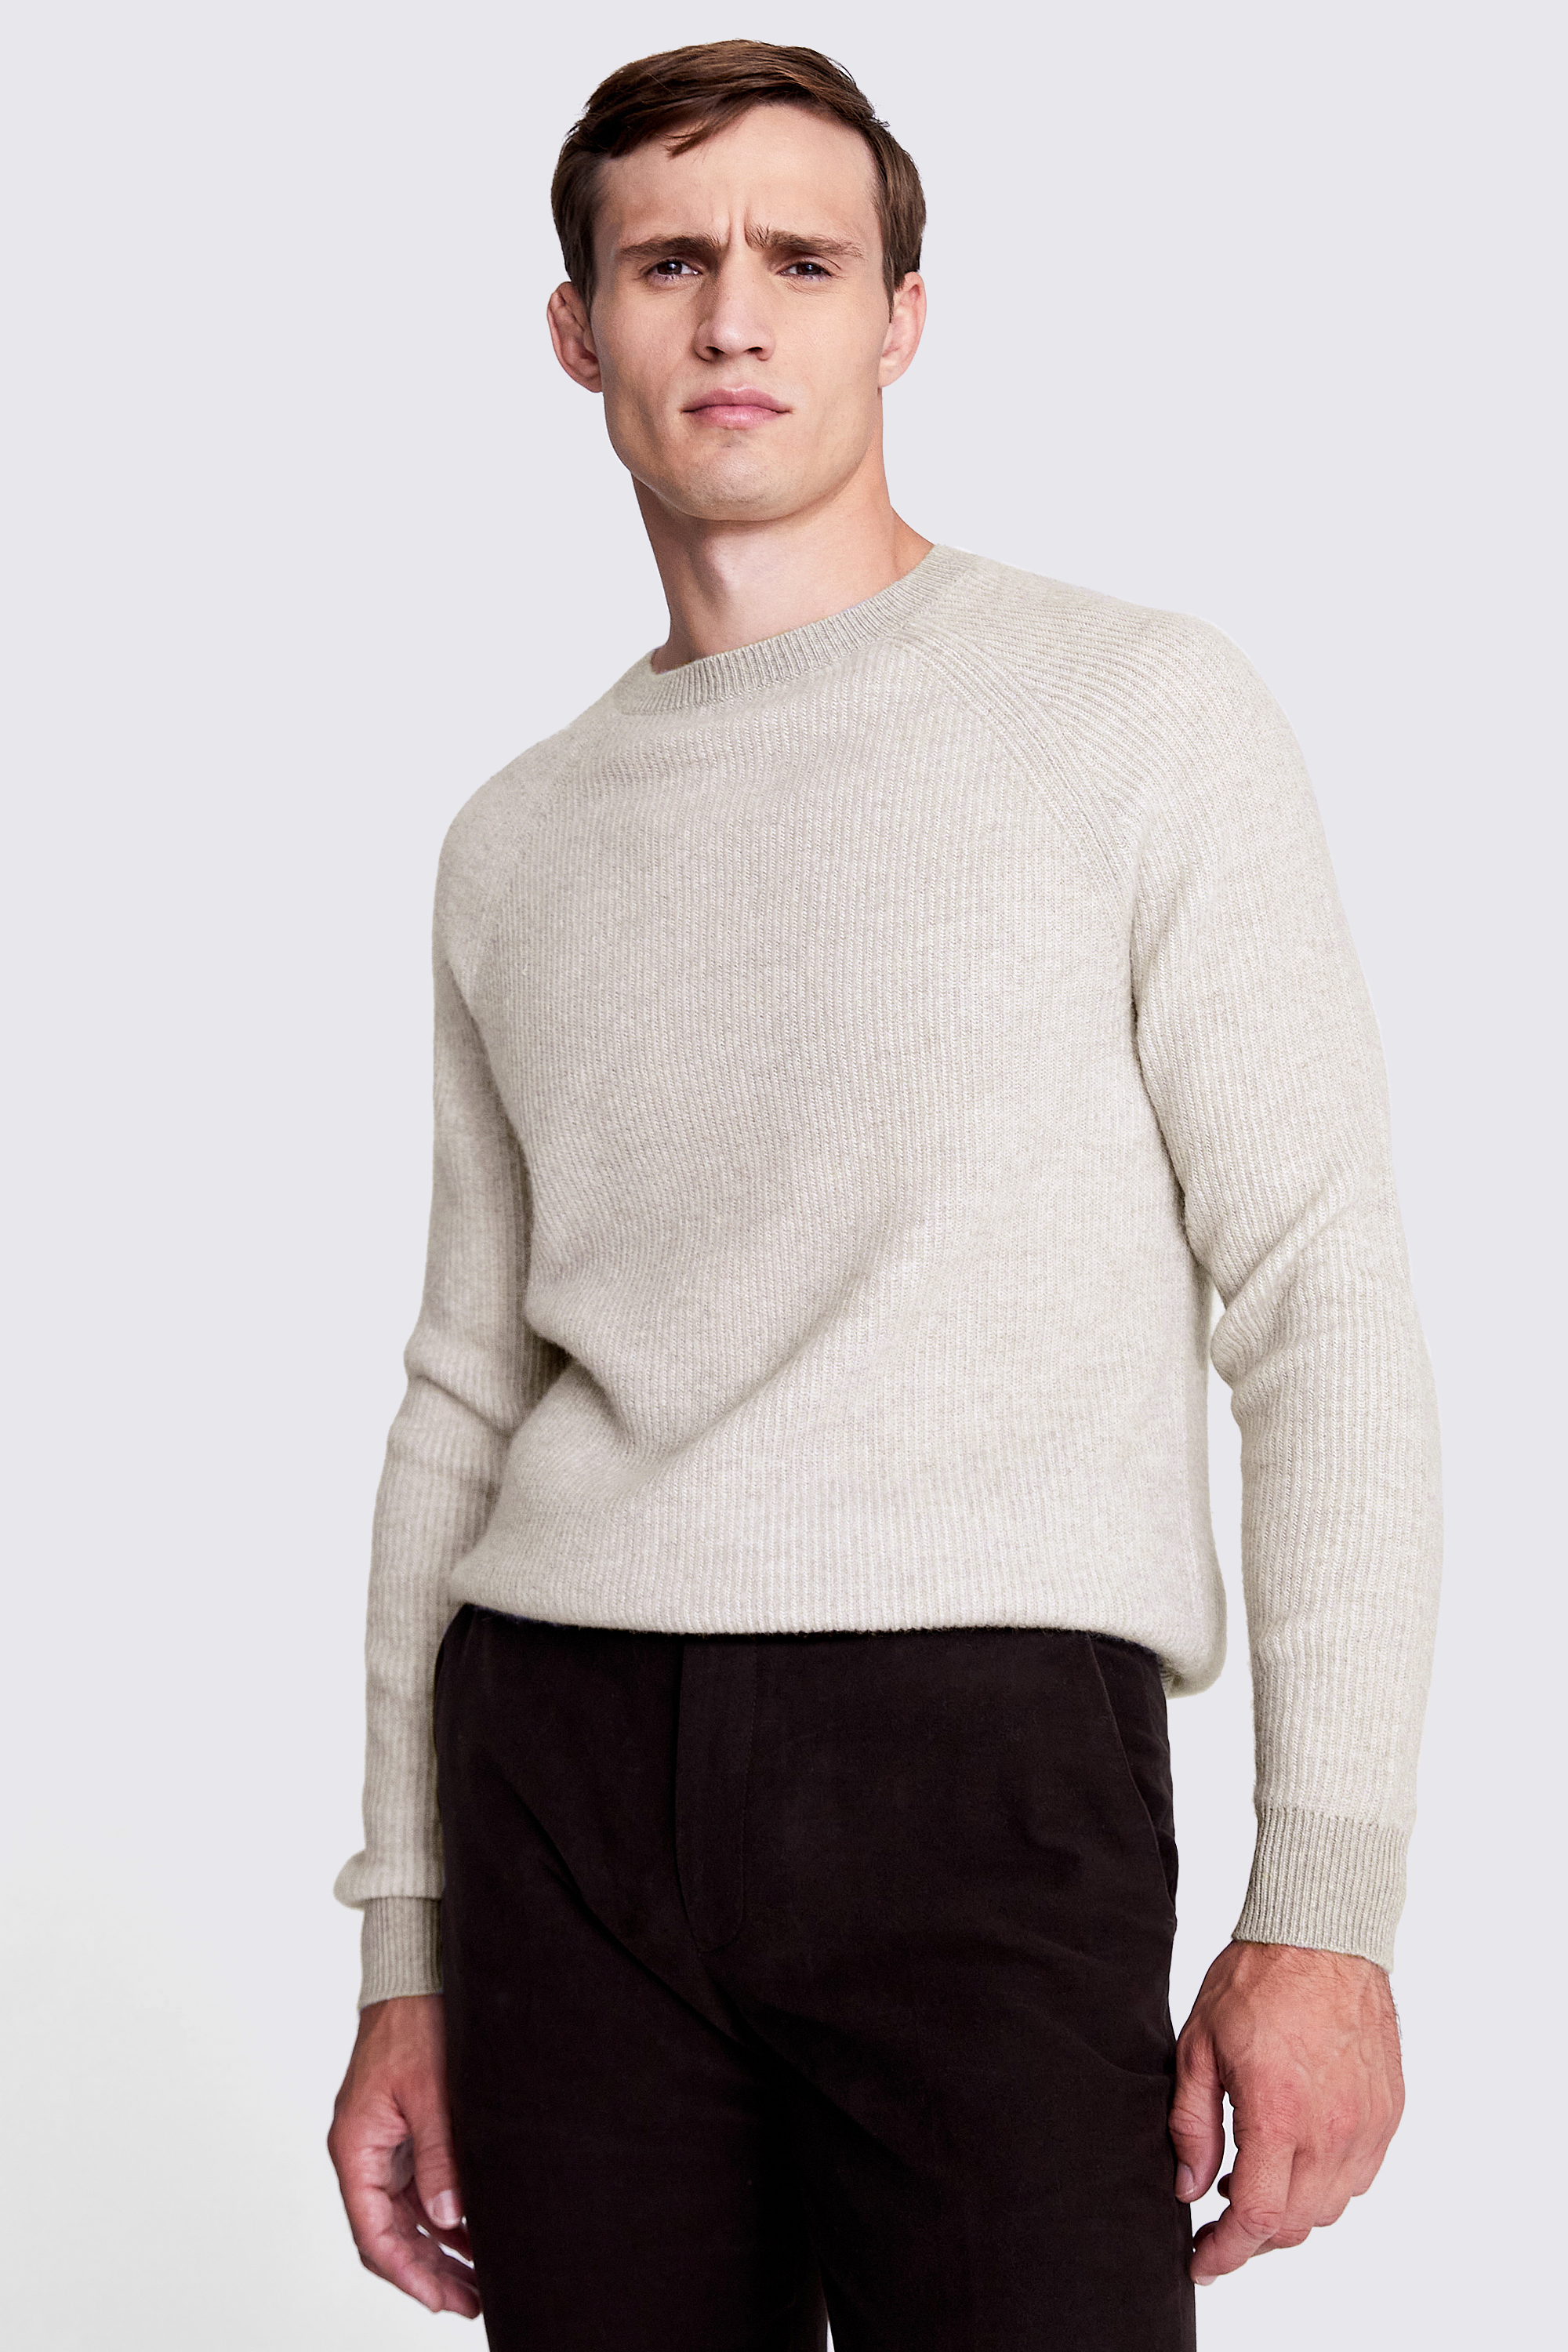 Oatmeal Cashmere Crew Neck Jumper | Buy Online at Moss